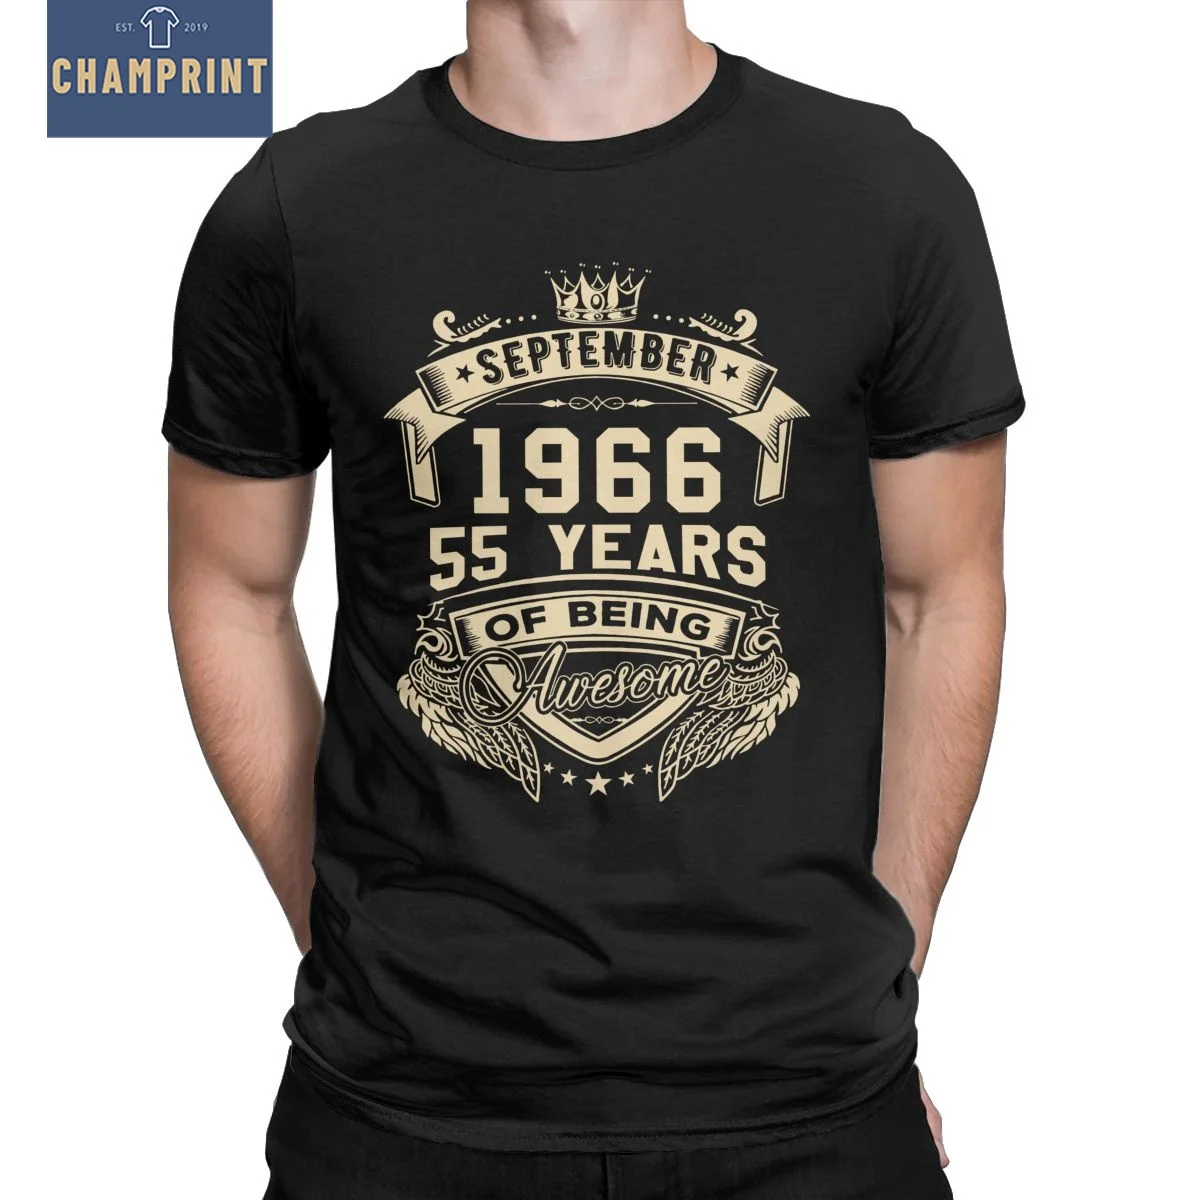 

Born In September 1966 55 Years Of Being Awesome Limited T-Shirts for Men 55th Birthday T Shirt 100% Cotton Tee Shirt Gift Idea